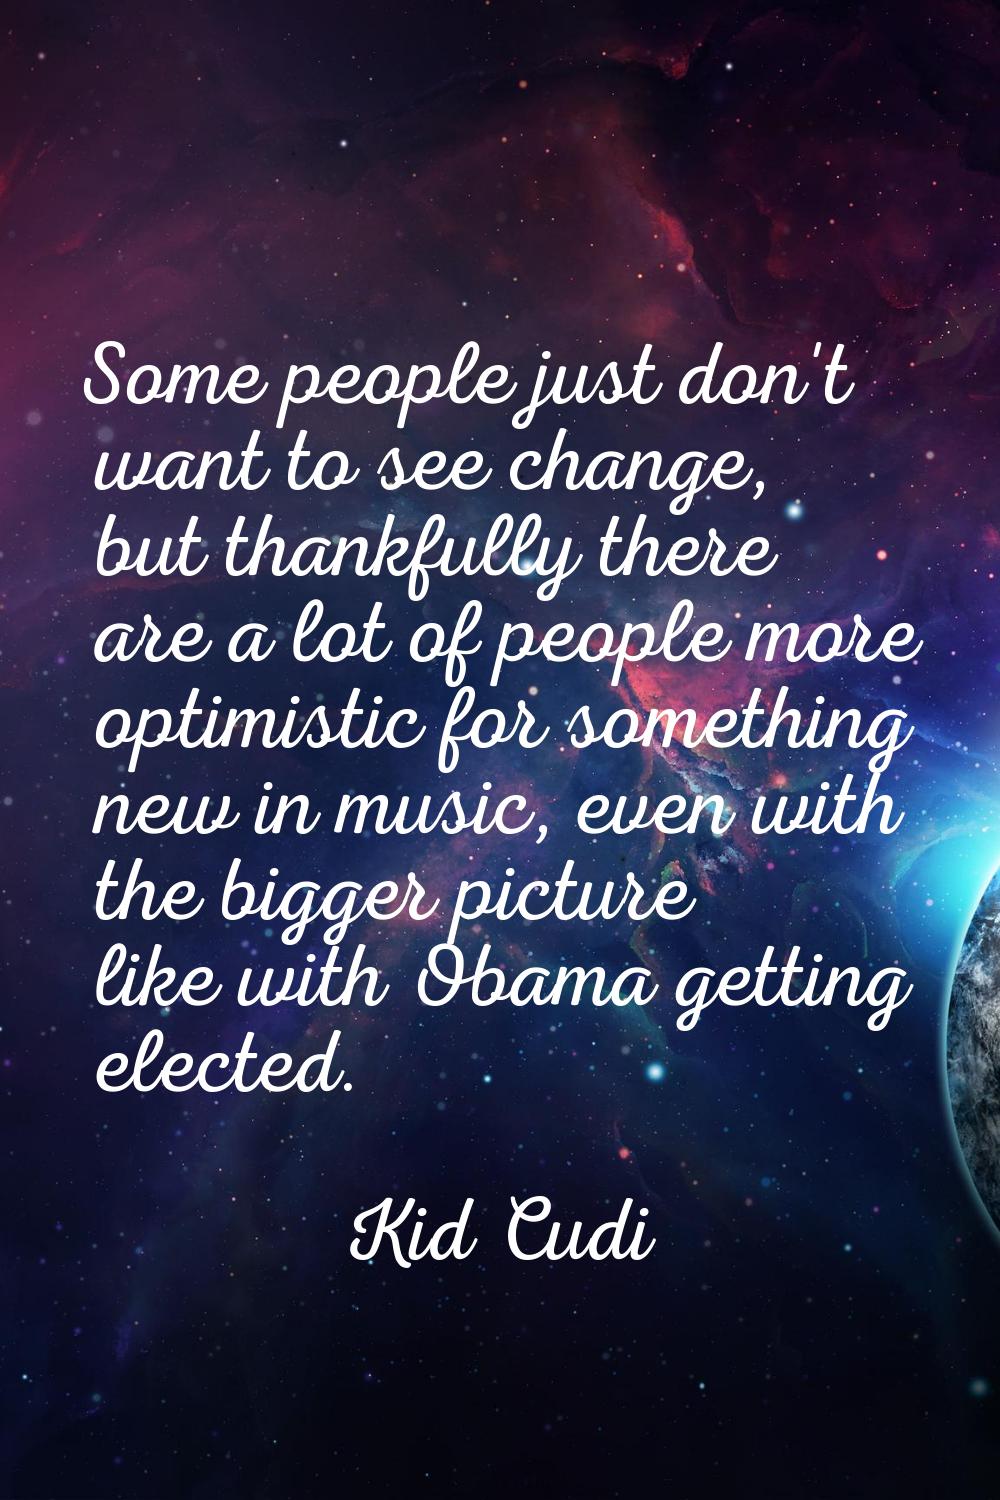 Some people just don't want to see change, but thankfully there are a lot of people more optimistic